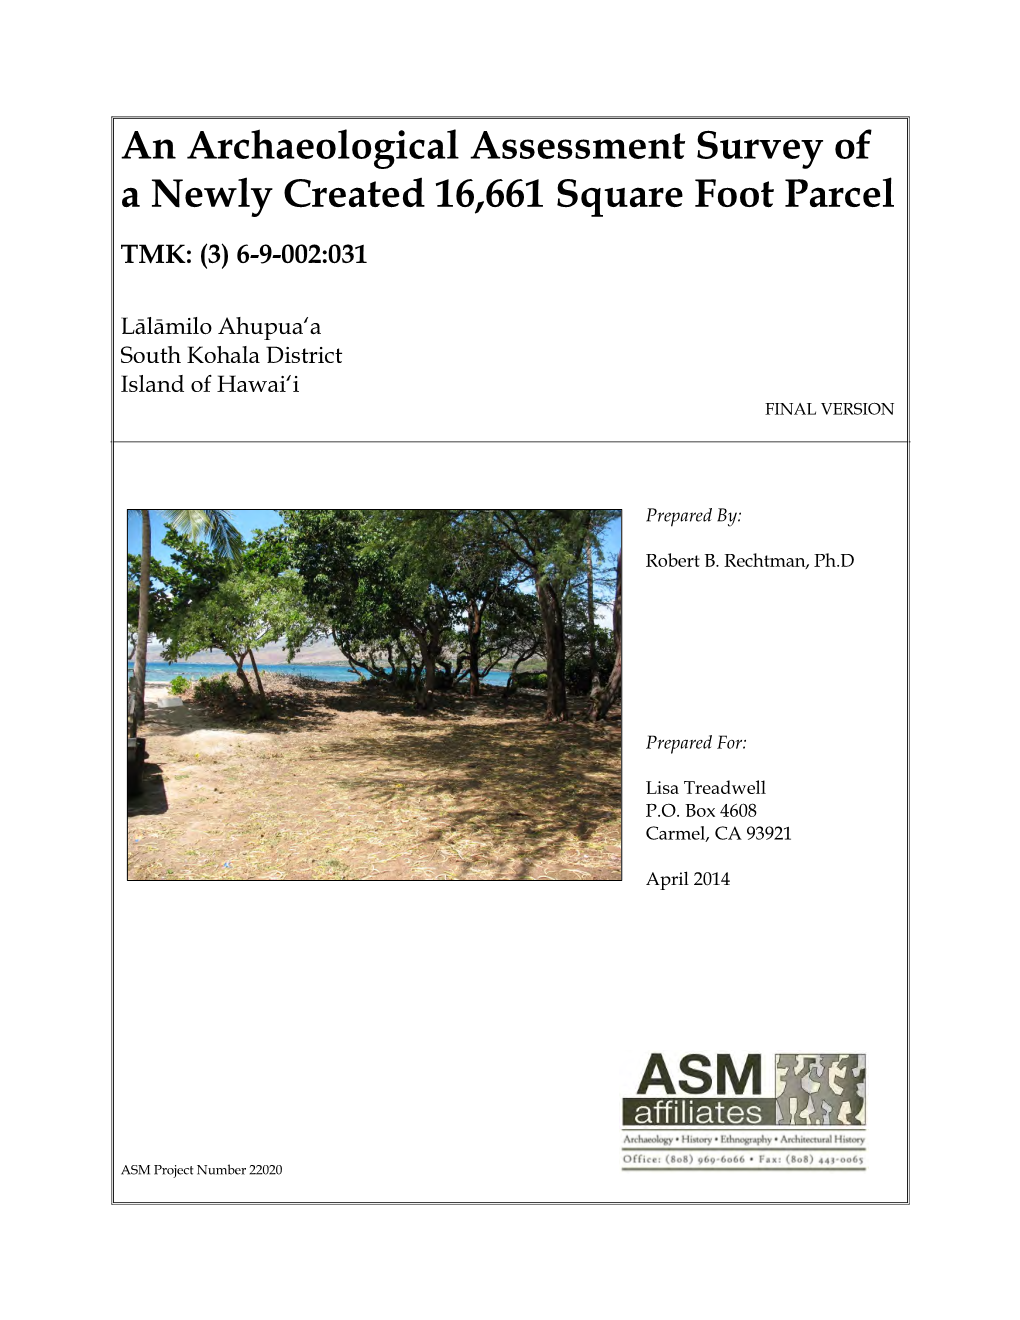 An Archaeological Assessment Survey of a Newly Created 16,661 Square Foot Parcel TMK: (3) 6-9-002:031